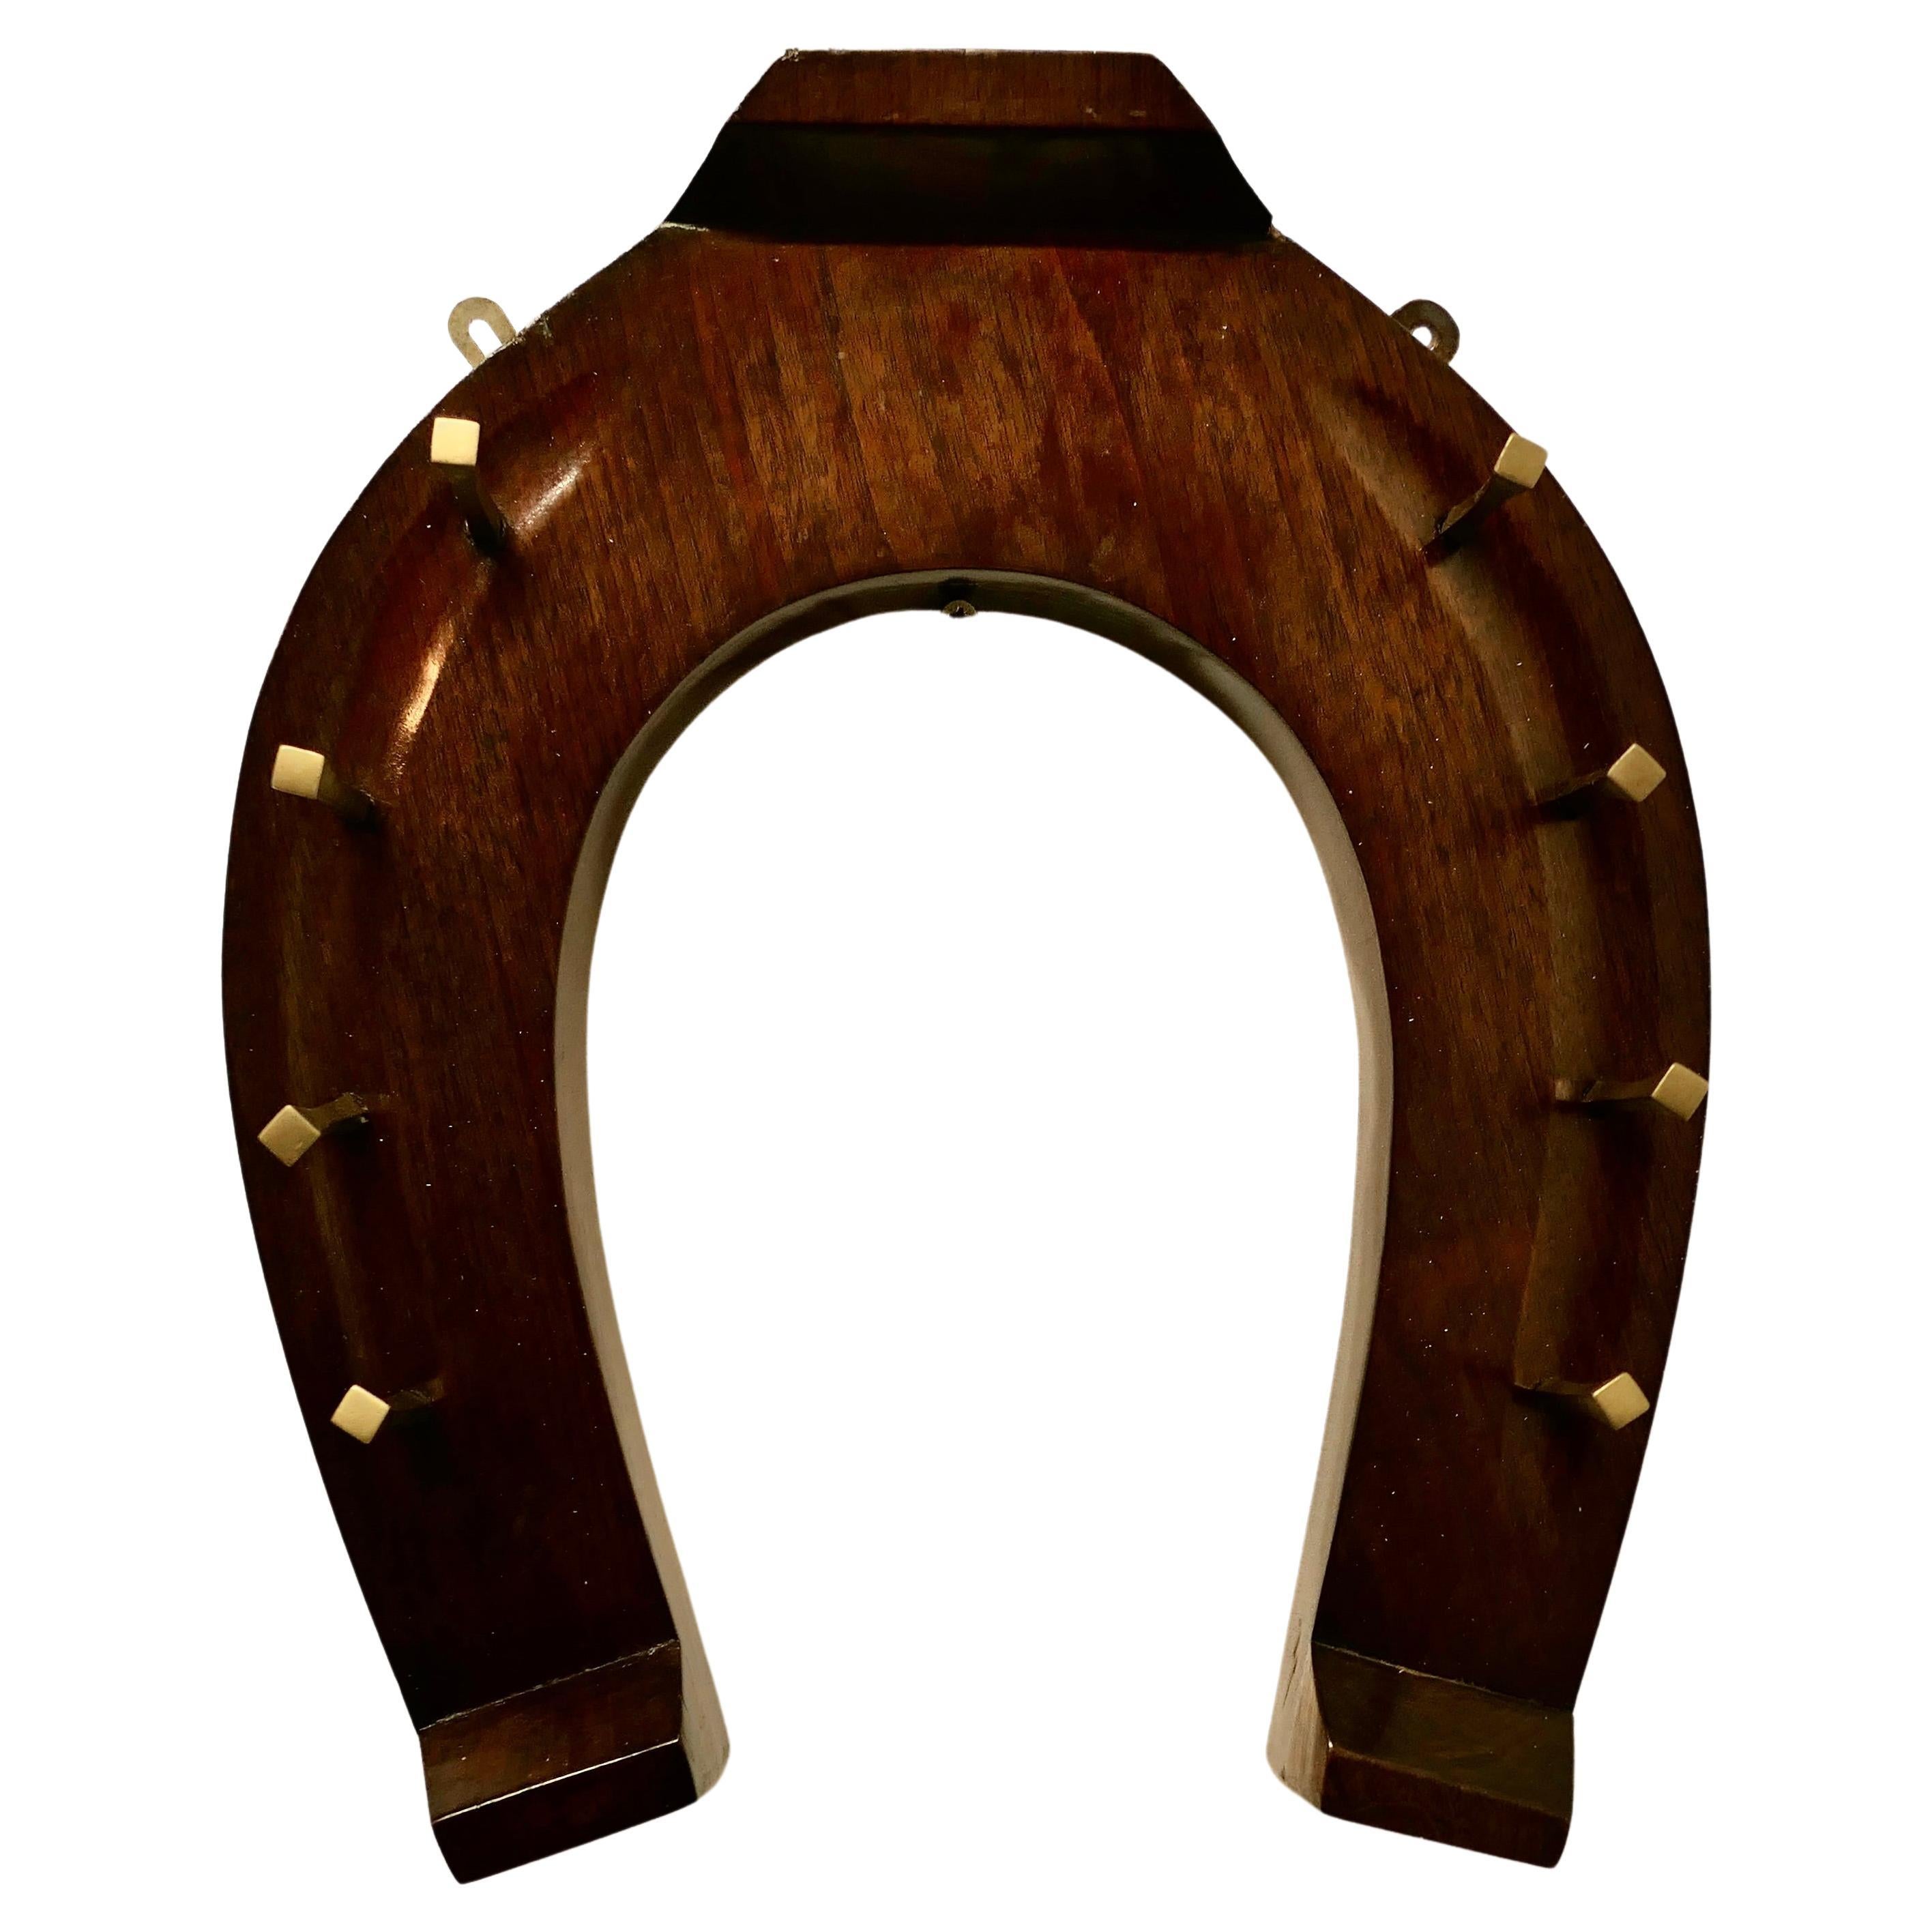 Irish Horseshoe Coat and Tack Rack by B McMullen  A fine quality piece  